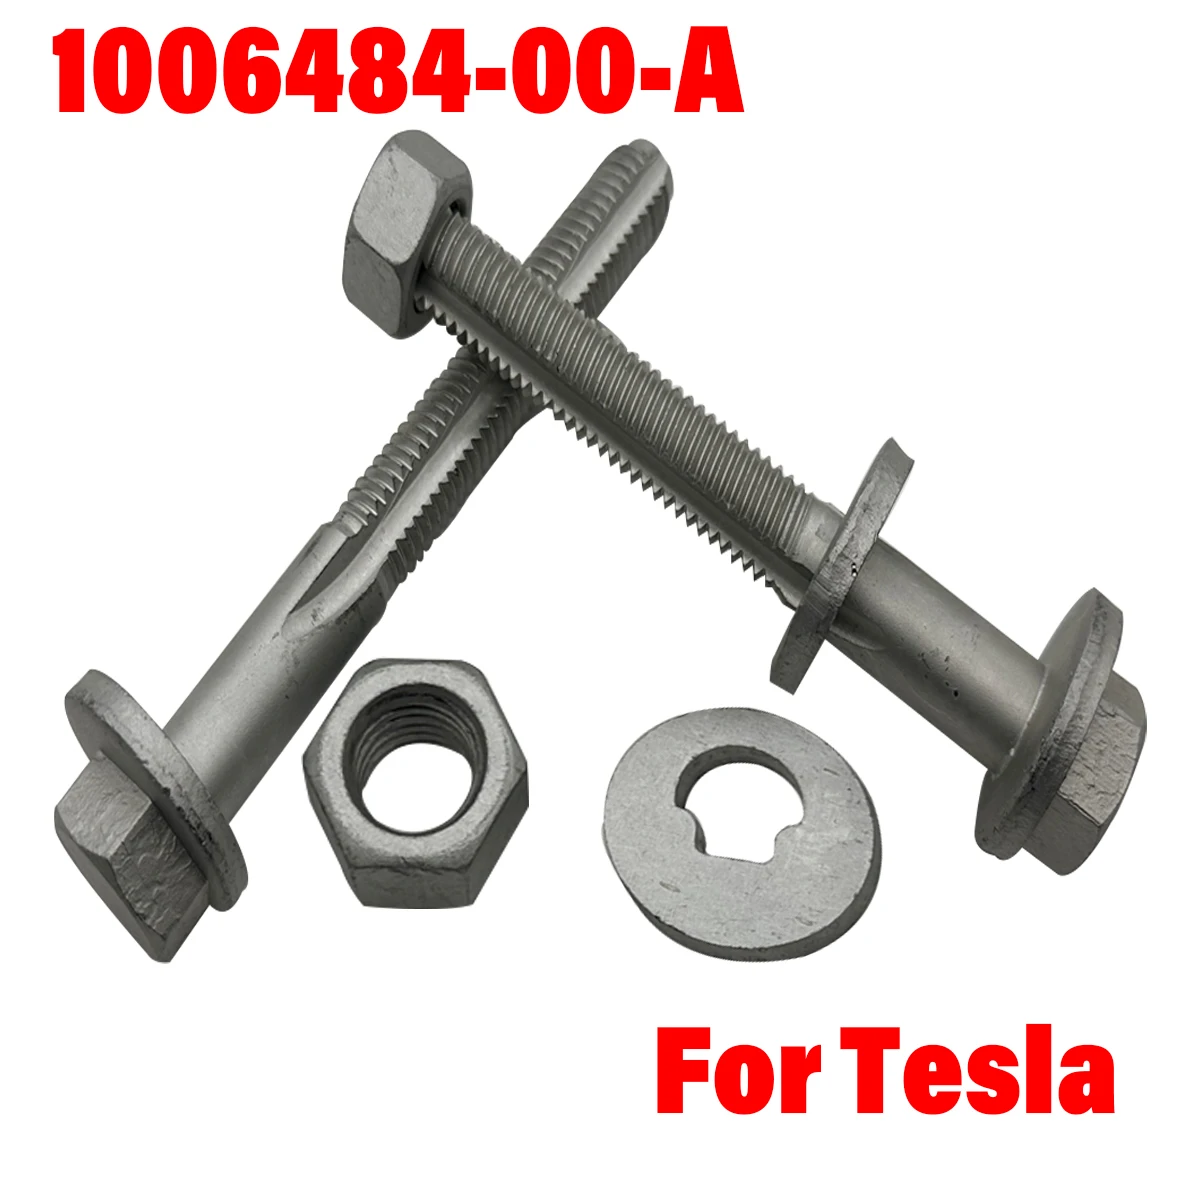 

For Tesla BOLT H CAM M14x2.00x114 [10.9]-G720 2007106 WASHER CAM and NUT CLN HEX NEW 2007107 1006484-00-A